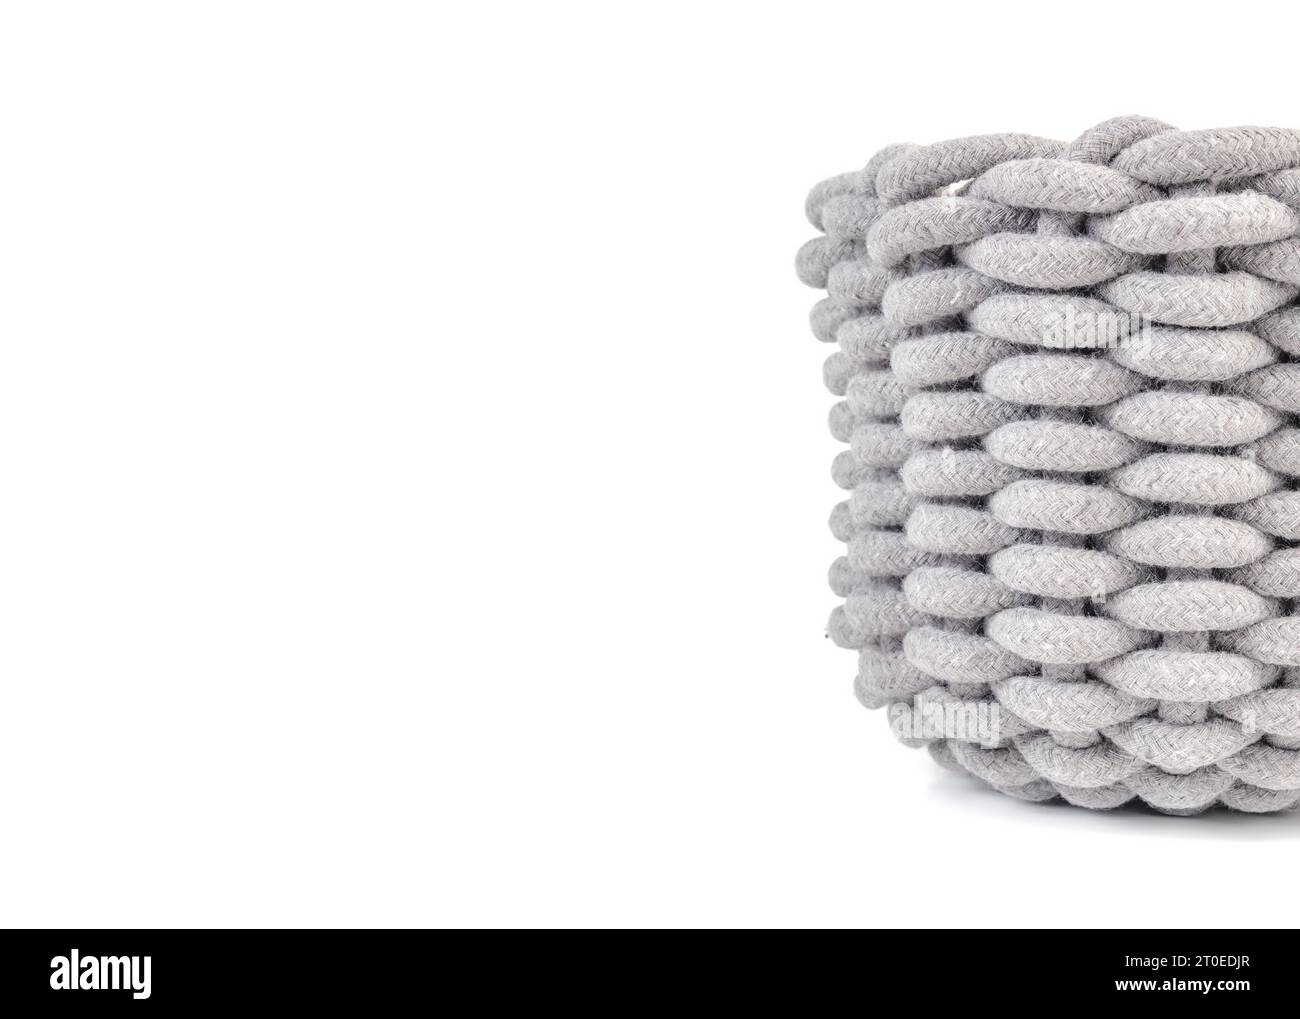 Isolated woven basket. Partial front view of light grey large storage basket made of woven cotton rope. Textile background texture or surface. Selecti Stock Photo